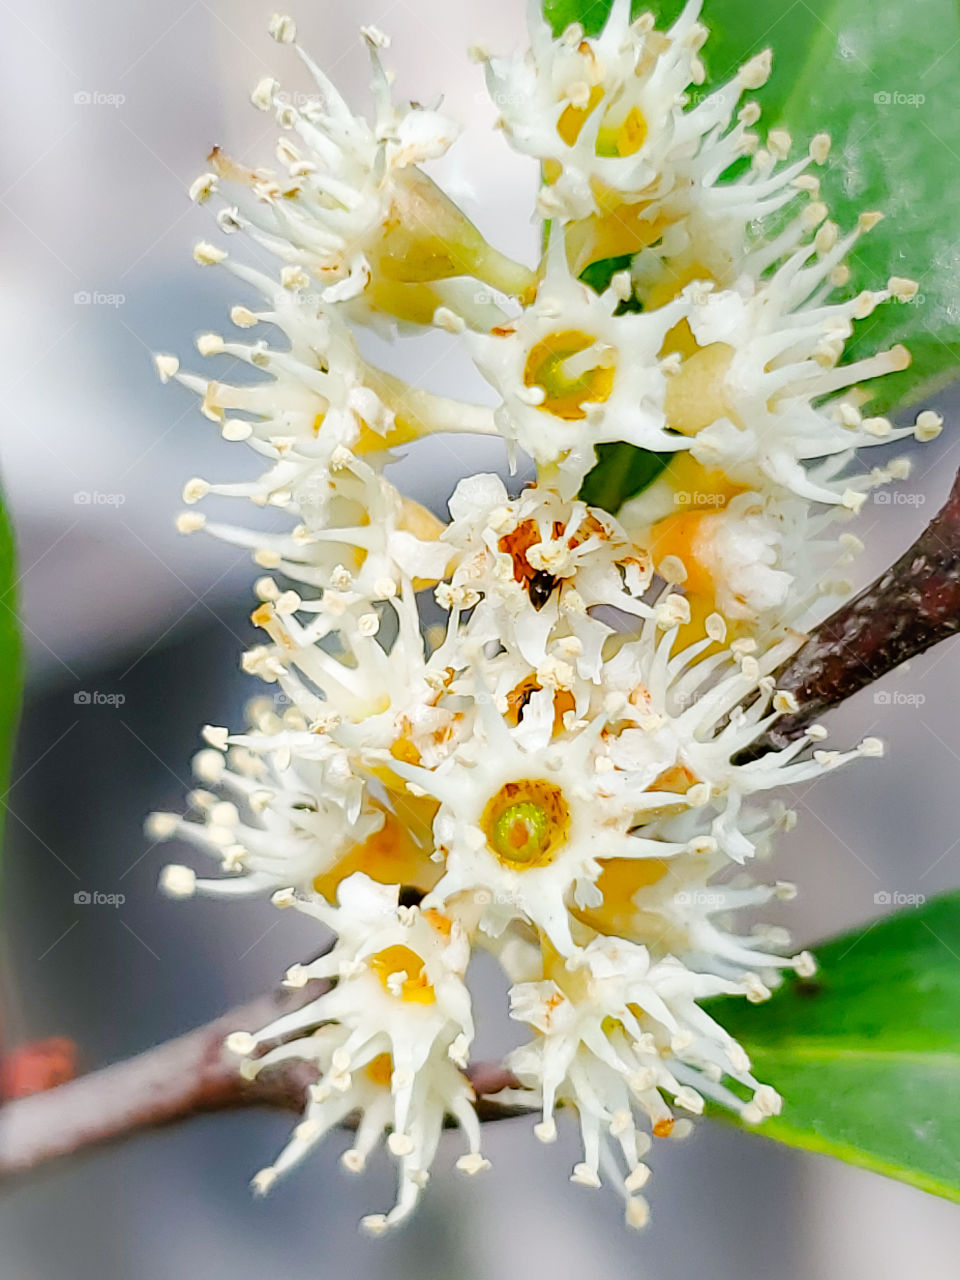 Closeup of the cherry laurel compacta aromatic cluster flowers